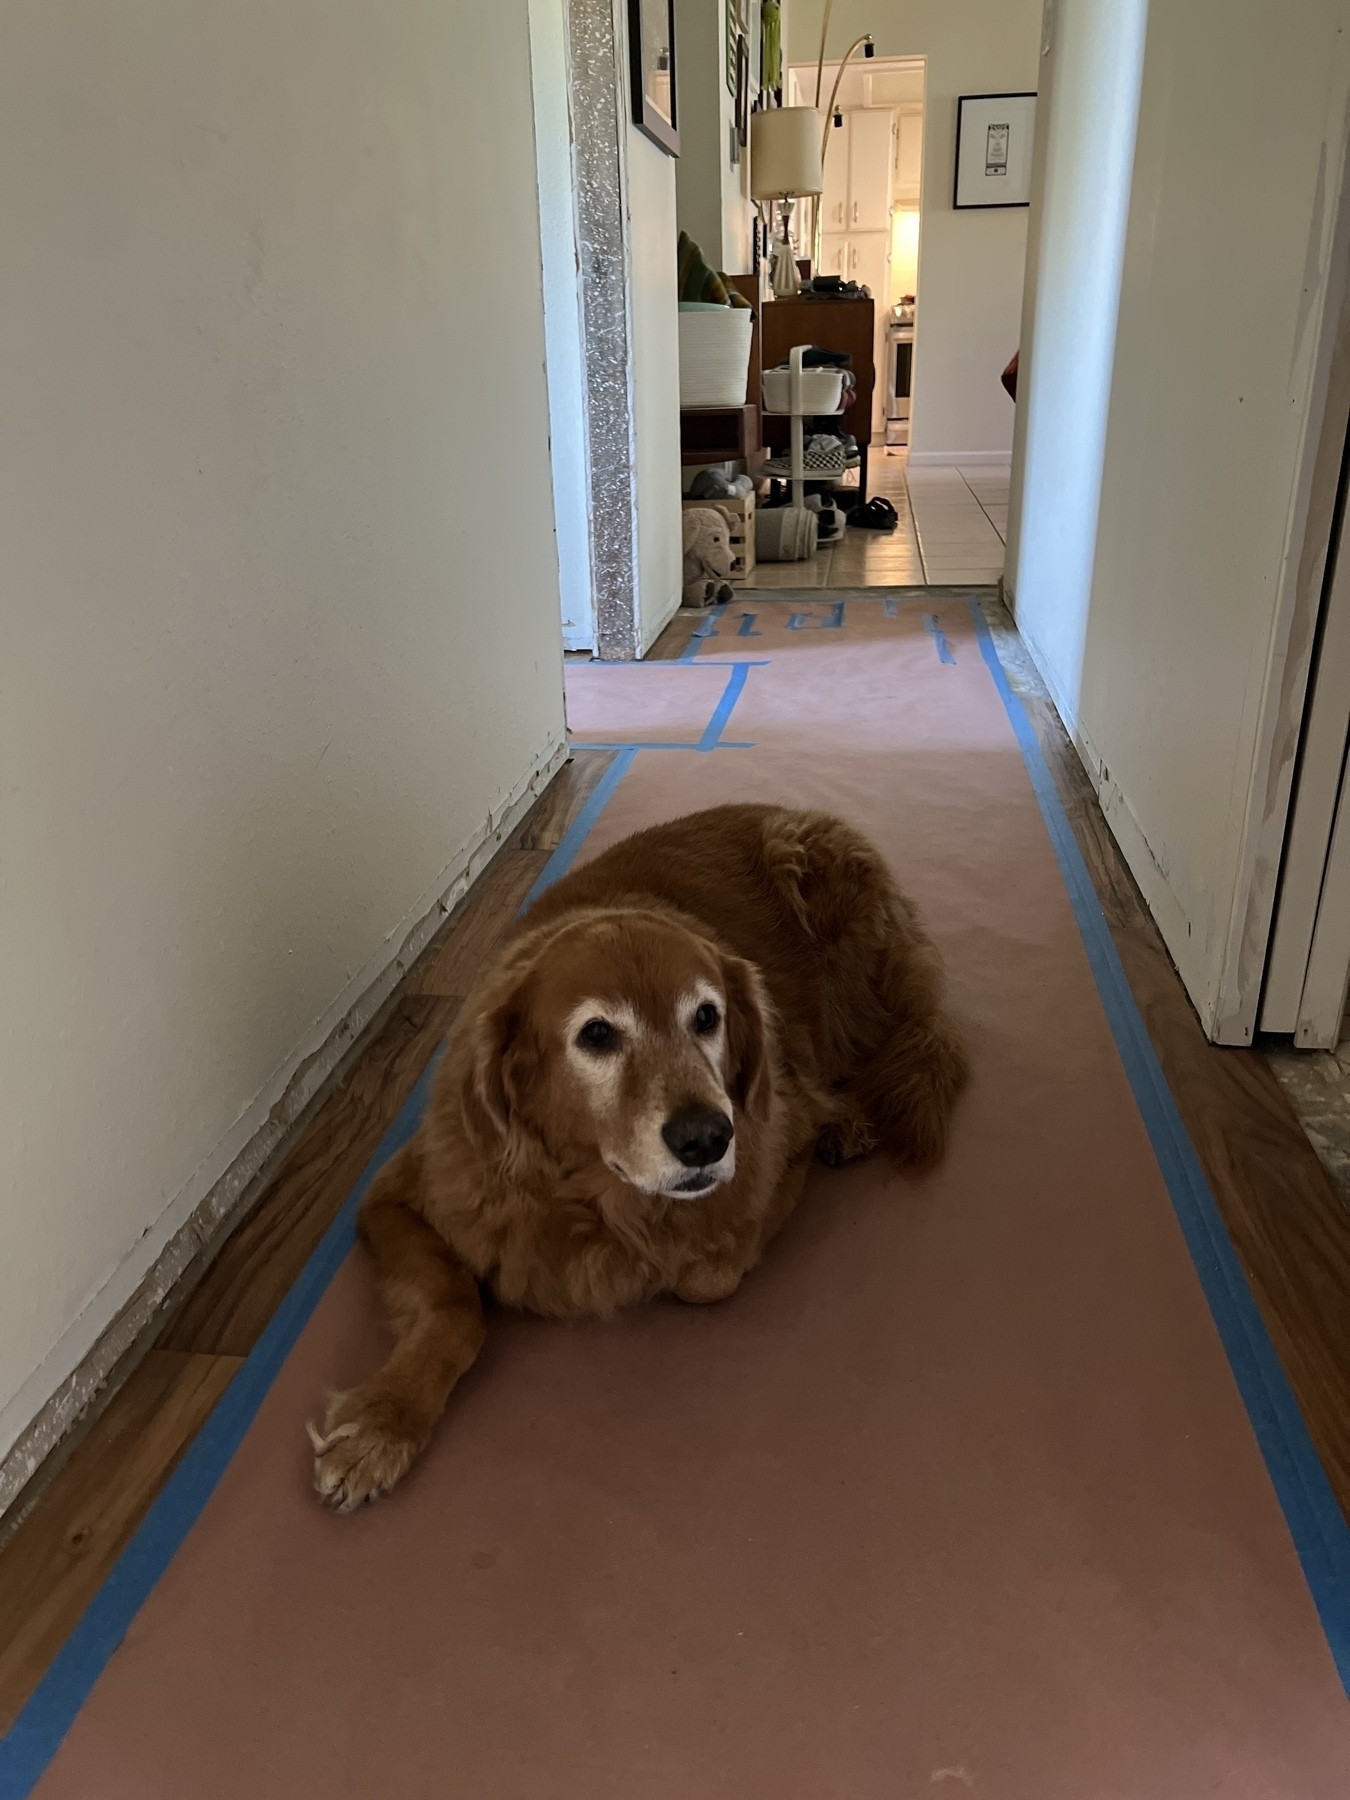 Bones, a golden retriever, lays on the floor looking upset that his house is in disarray